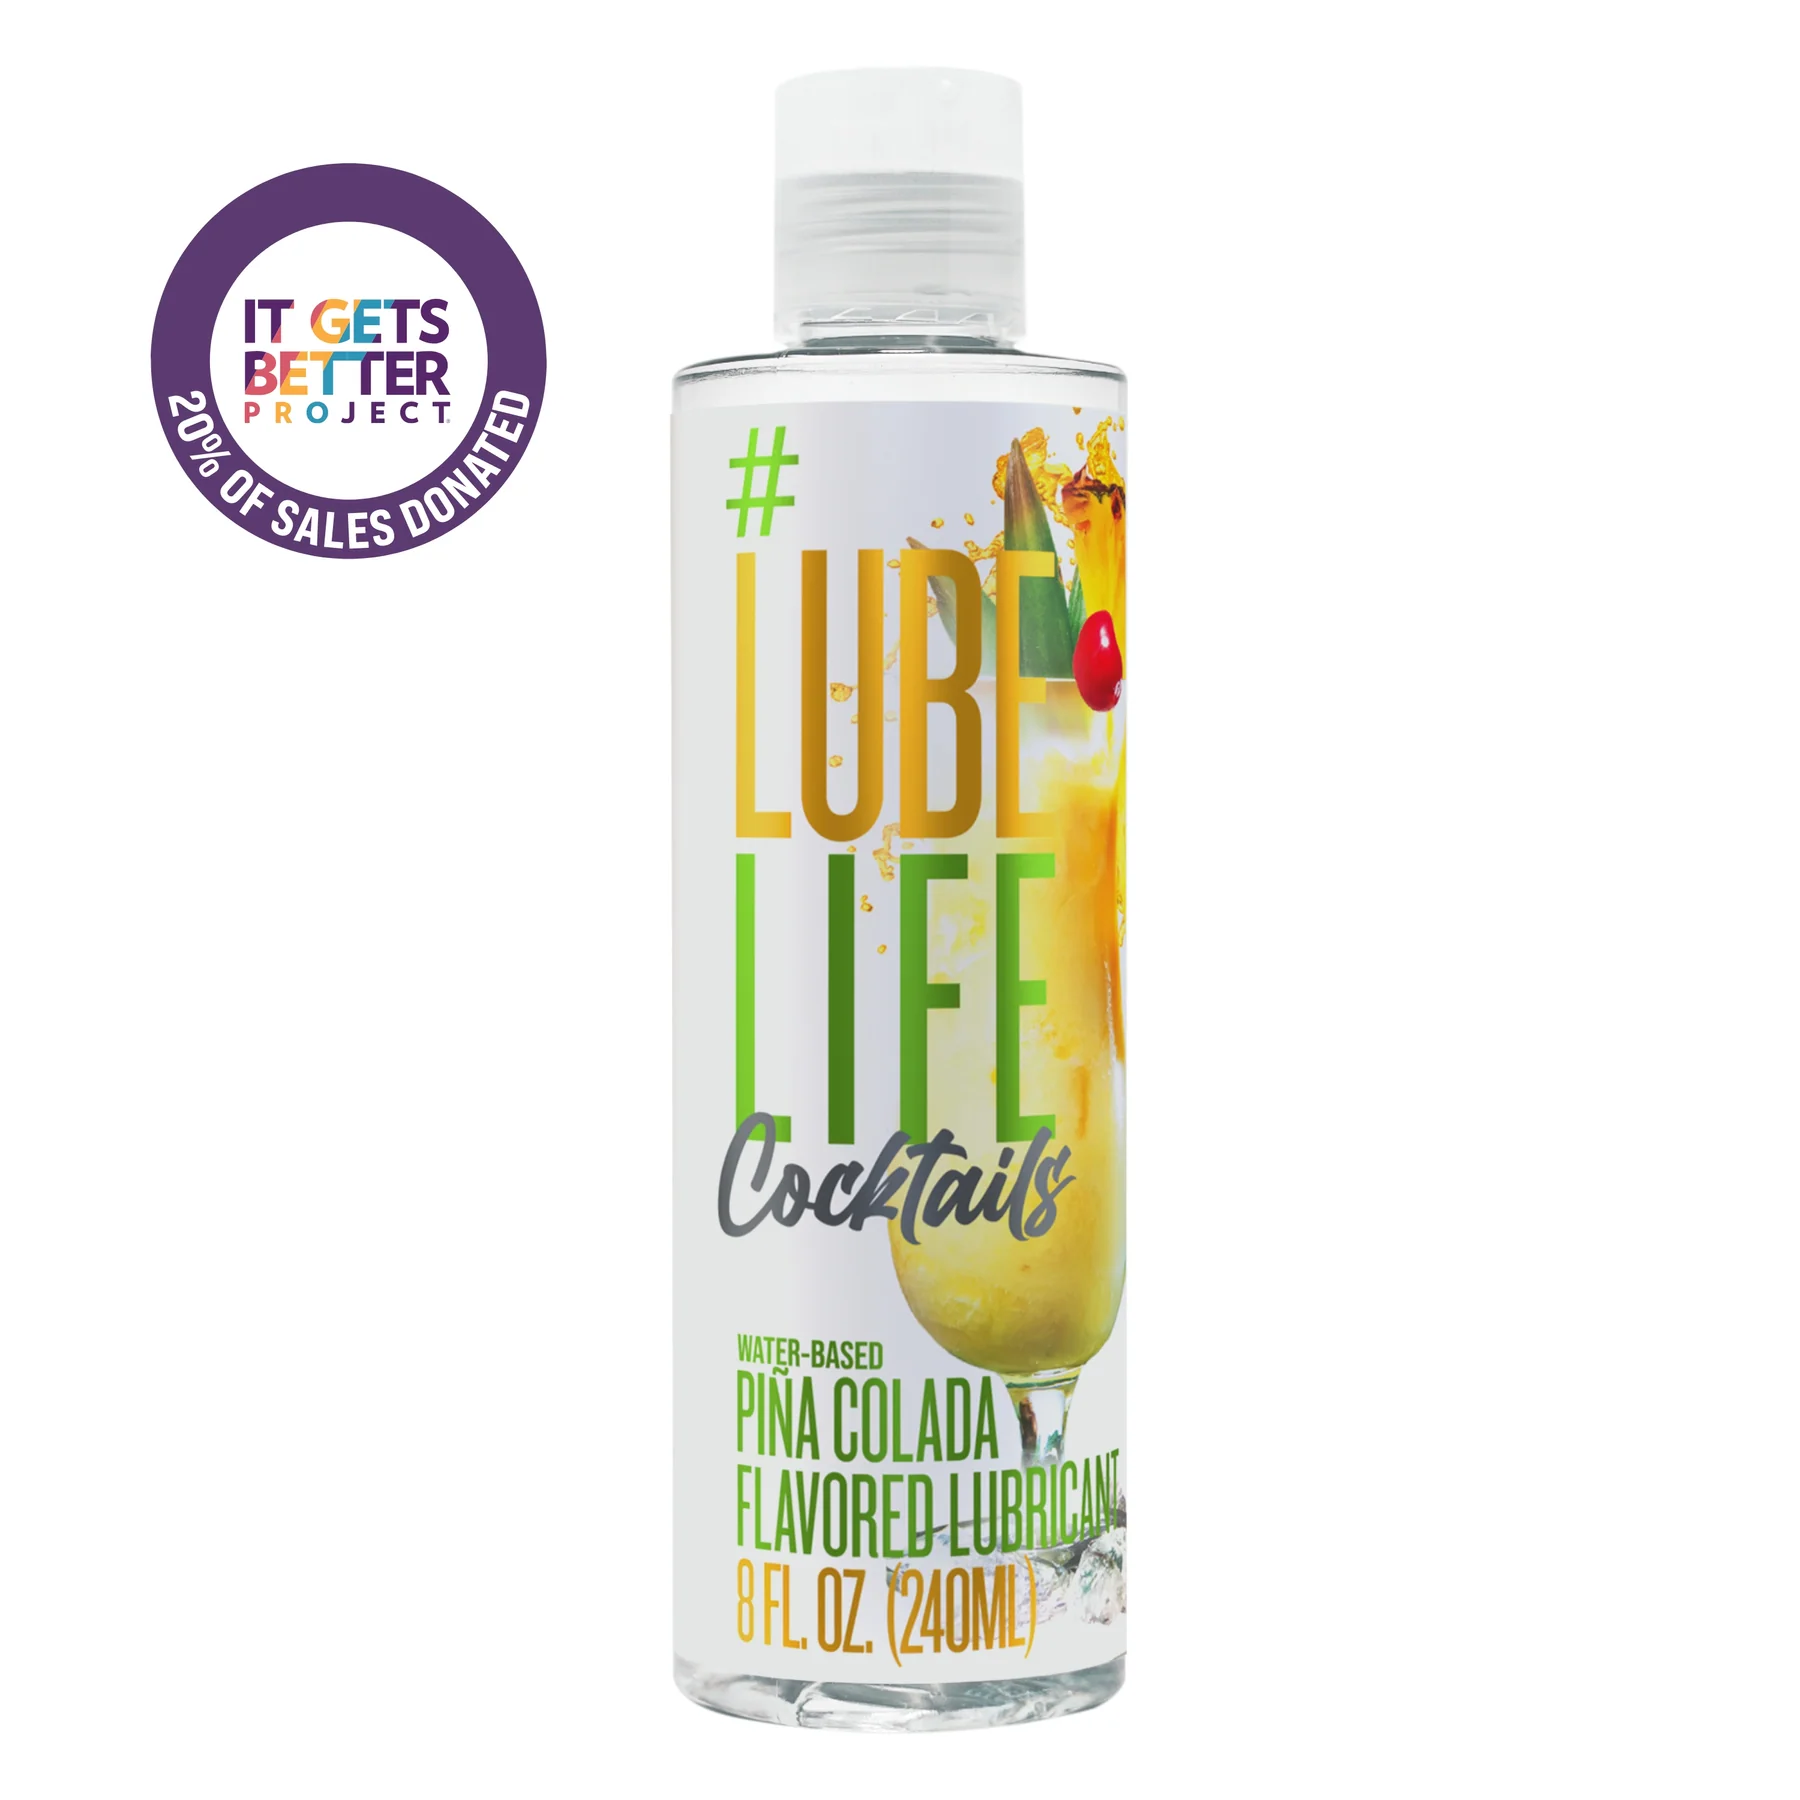 LubeLife + Water-Based Piña Colada Flavored Lubricant